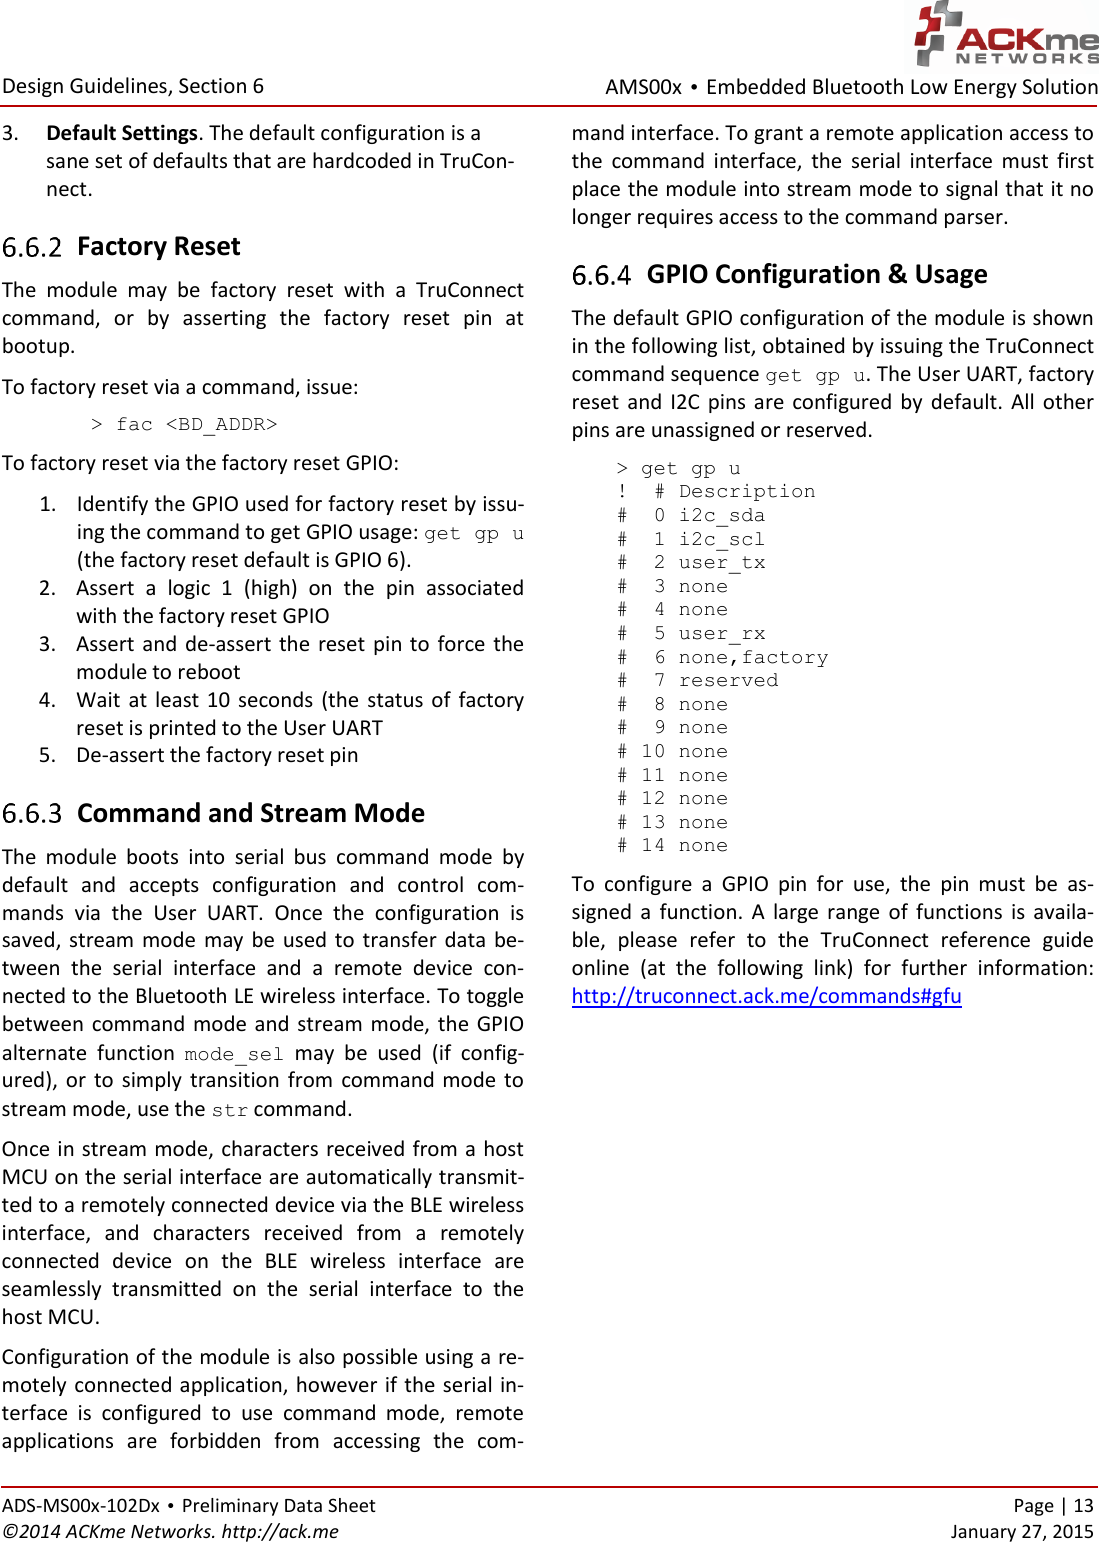 AMS00x • Embedded Bluetooth Low Energy Solution  Design Guidelines, Section 6 ADS-MS00x-102Dx • Preliminary Data Sheet    Page | 13 ©2014 ACKme Networks. http://ack.me    January 27, 2015 3. Default Settings. The default configuration is a sane set of defaults that are hardcoded in TruCon-nect.  Factory Reset The  module  may  be  factory  reset  with  a  TruConnect command,  or  by  asserting  the  factory  reset  pin  at bootup.  To factory reset via a command, issue: &gt; fac &lt;BD_ADDR&gt; To factory reset via the factory reset GPIO: 1. Identify the GPIO used for factory reset by issu-ing the command to get GPIO usage: get gp u  (the factory reset default is GPIO 6). 2. Assert  a  logic  1  (high)  on  the  pin  associated with the factory reset GPIO 3. Assert and de-assert the reset pin to force the module to reboot 4. Wait  at  least 10  seconds  (the  status  of  factory reset is printed to the User UART 5. De-assert the factory reset pin  Command and Stream Mode The  module  boots  into  serial  bus  command  mode  by default  and  accepts  configuration  and  control  com-mands  via  the  User  UART.  Once  the  configuration  is saved,  stream mode  may  be  used to transfer  data  be-tween  the  serial  interface  and  a  remote  device  con-nected to the Bluetooth LE wireless interface. To toggle between command mode and stream mode, the GPIO alternate  function  mode_sel  may  be  used  (if  config-ured),  or  to  simply  transition  from  command mode  to stream mode, use the str command.  Once in stream mode, characters received from a host MCU on the serial interface are automatically transmit-ted to a remotely connected device via the BLE wireless interface,  and  characters  received  from  a  remotely connected  device  on  the  BLE  wireless  interface  are seamlessly  transmitted  on  the  serial  interface  to  the host MCU. Configuration of the module is also possible using a re-motely connected application, however if the serial in-terface  is  configured  to  use  command  mode,  remote applications  are  forbidden  from  accessing  the  com-mand interface. To grant a remote application access to the  command  interface,  the  serial  interface  must  first place the module into stream mode to signal that it no longer requires access to the command parser.  GPIO Configuration &amp; Usage The default GPIO configuration of the module is shown in the following list, obtained by issuing the TruConnect command sequence get gp u. The User UART, factory reset  and  I2C  pins  are  configured by  default.  All  other pins are unassigned or reserved.  &gt; get gp u  !  # Description  #  0 i2c_sda  #  1 i2c_scl  #  2 user_tx  #  3 none  #  4 none  #  5 user_rx  #  6 none,factory  #  7 reserved  #  8 none  #  9 none  # 10 none  # 11 none  # 12 none  # 13 none  # 14 none To  configure  a  GPIO  pin  for  use,  the  pin  must  be  as-signed  a  function.  A  large  range  of  functions  is  availa-ble,  please  refer  to  the  TruConnect  reference  guide online  (at  the  following  link)  for  further  information: http://truconnect.ack.me/commands#gfu   